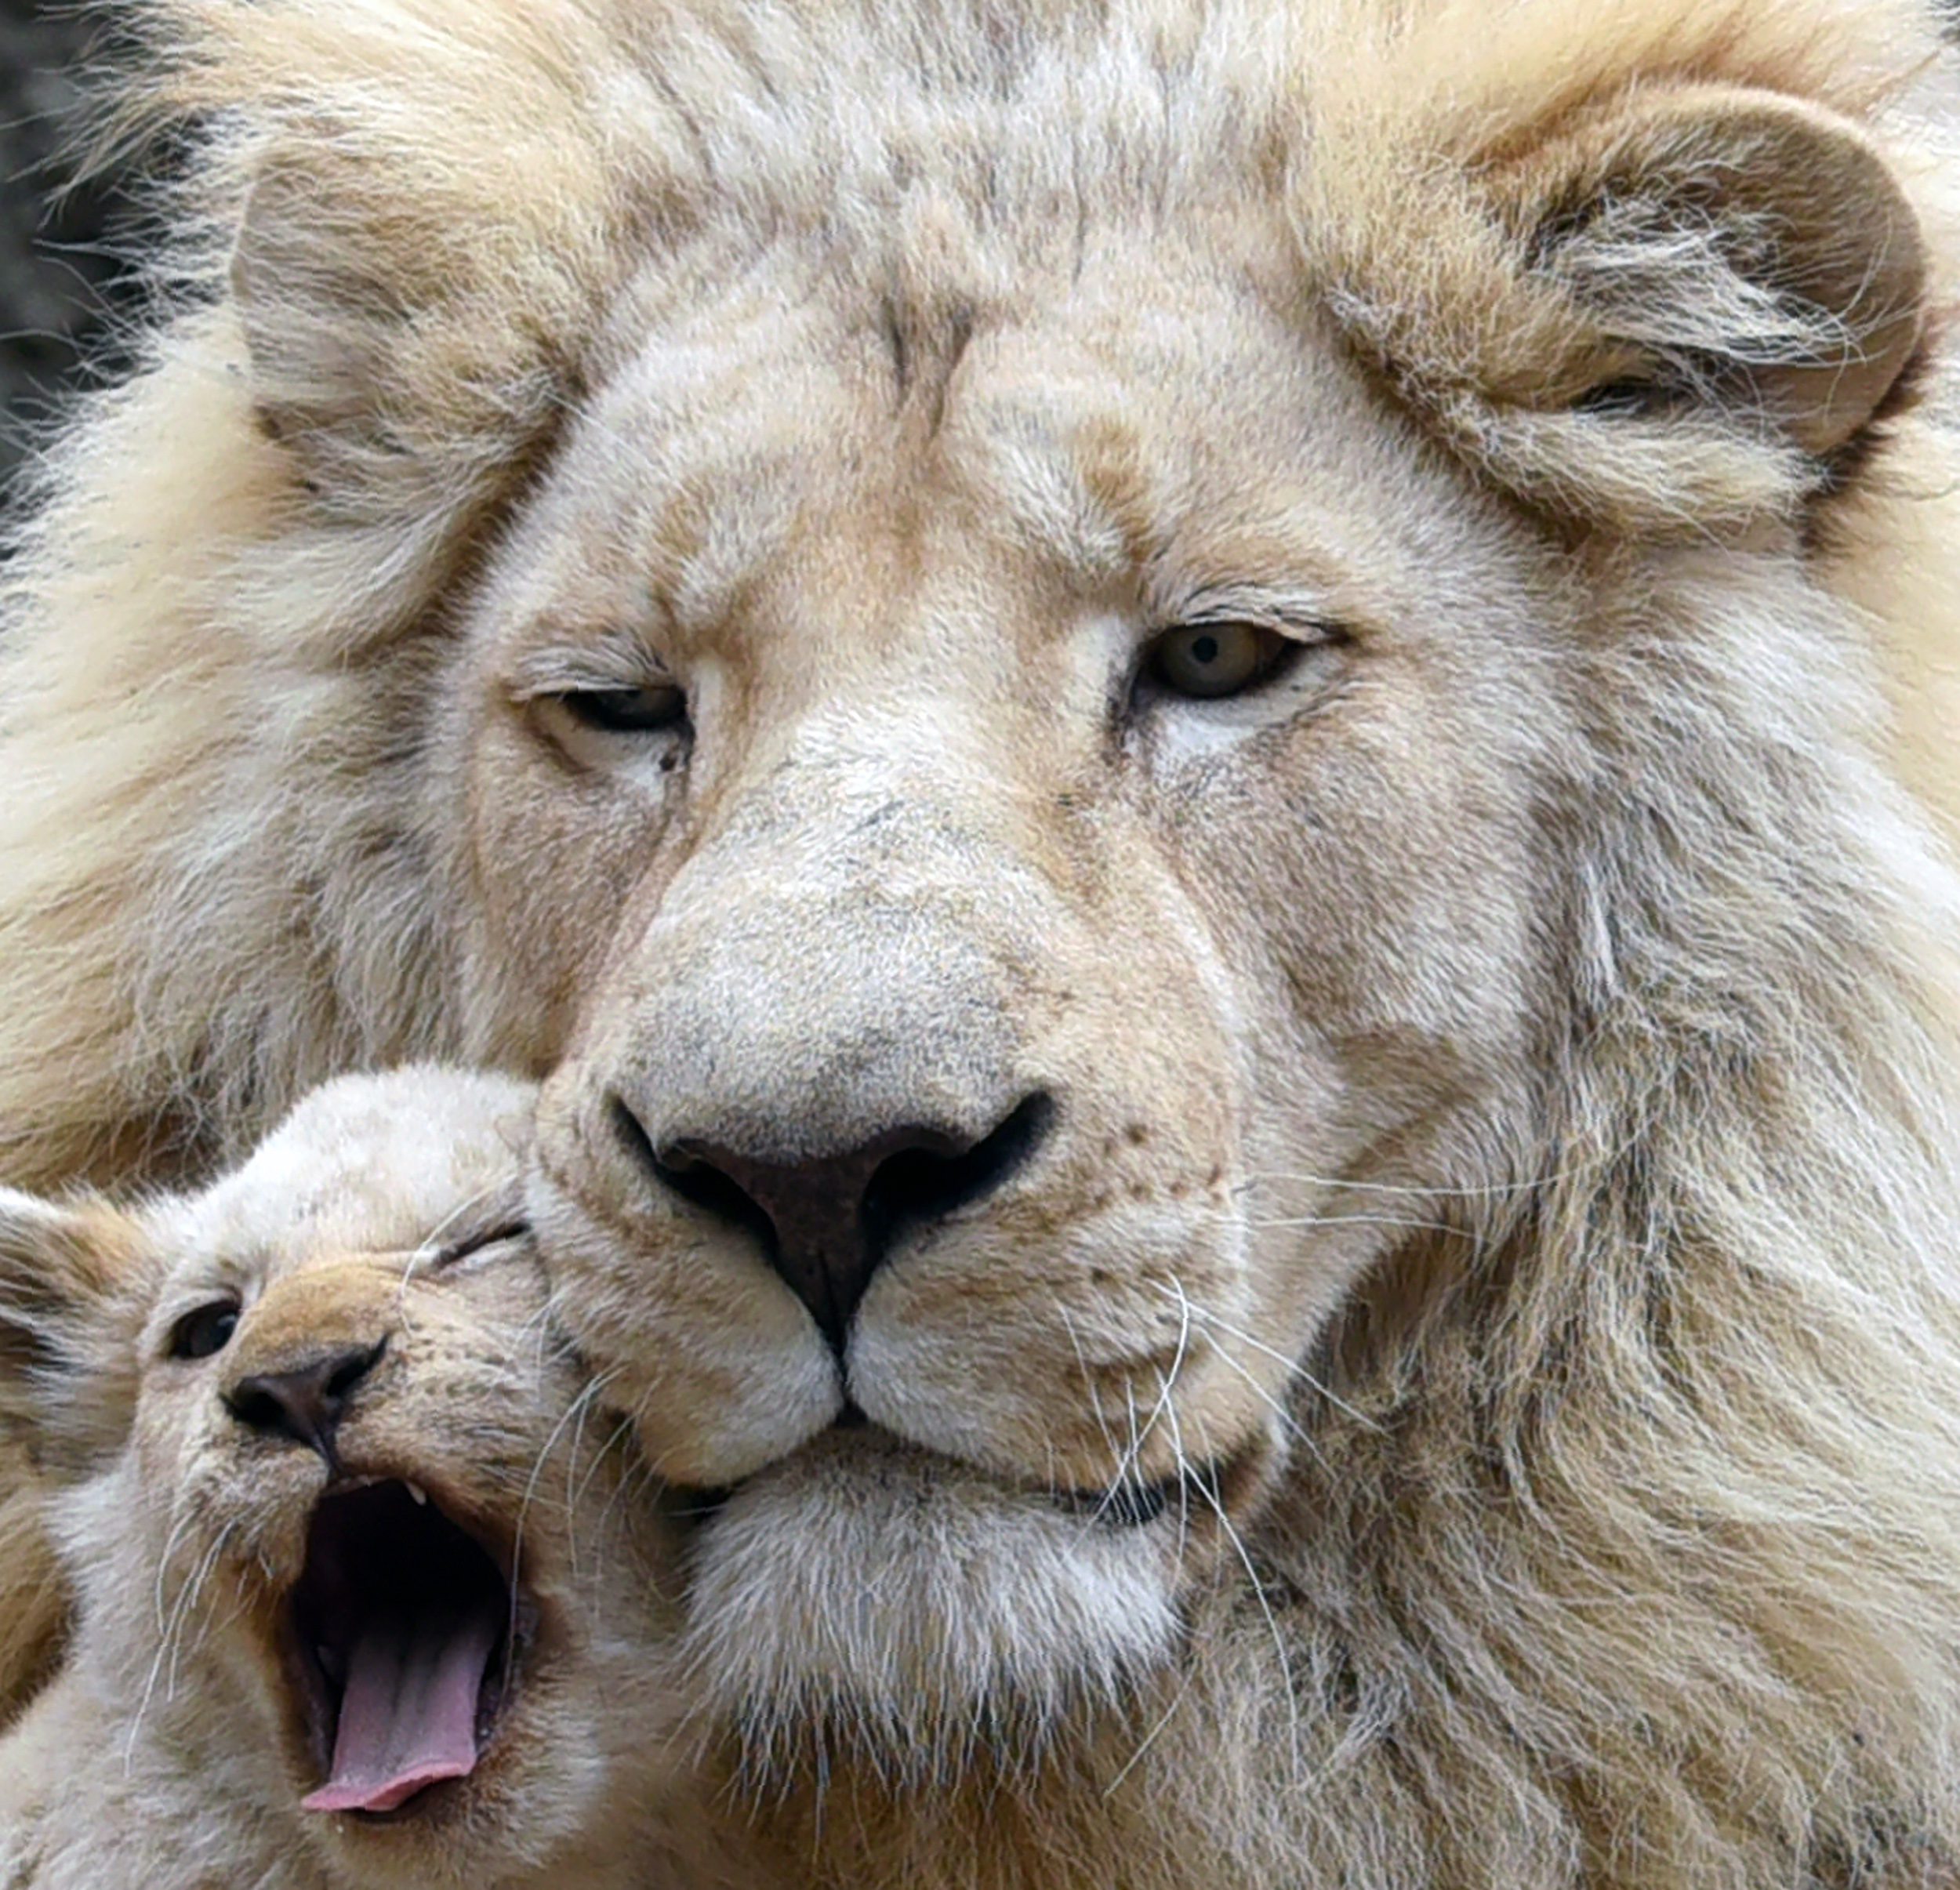 A four-month-old white lion cub cuddles up to its father Sam inside their enclosure at a zoo in Tbilisi on November 30, 2016. / AFP PHOTO / Vano SHLAMOV